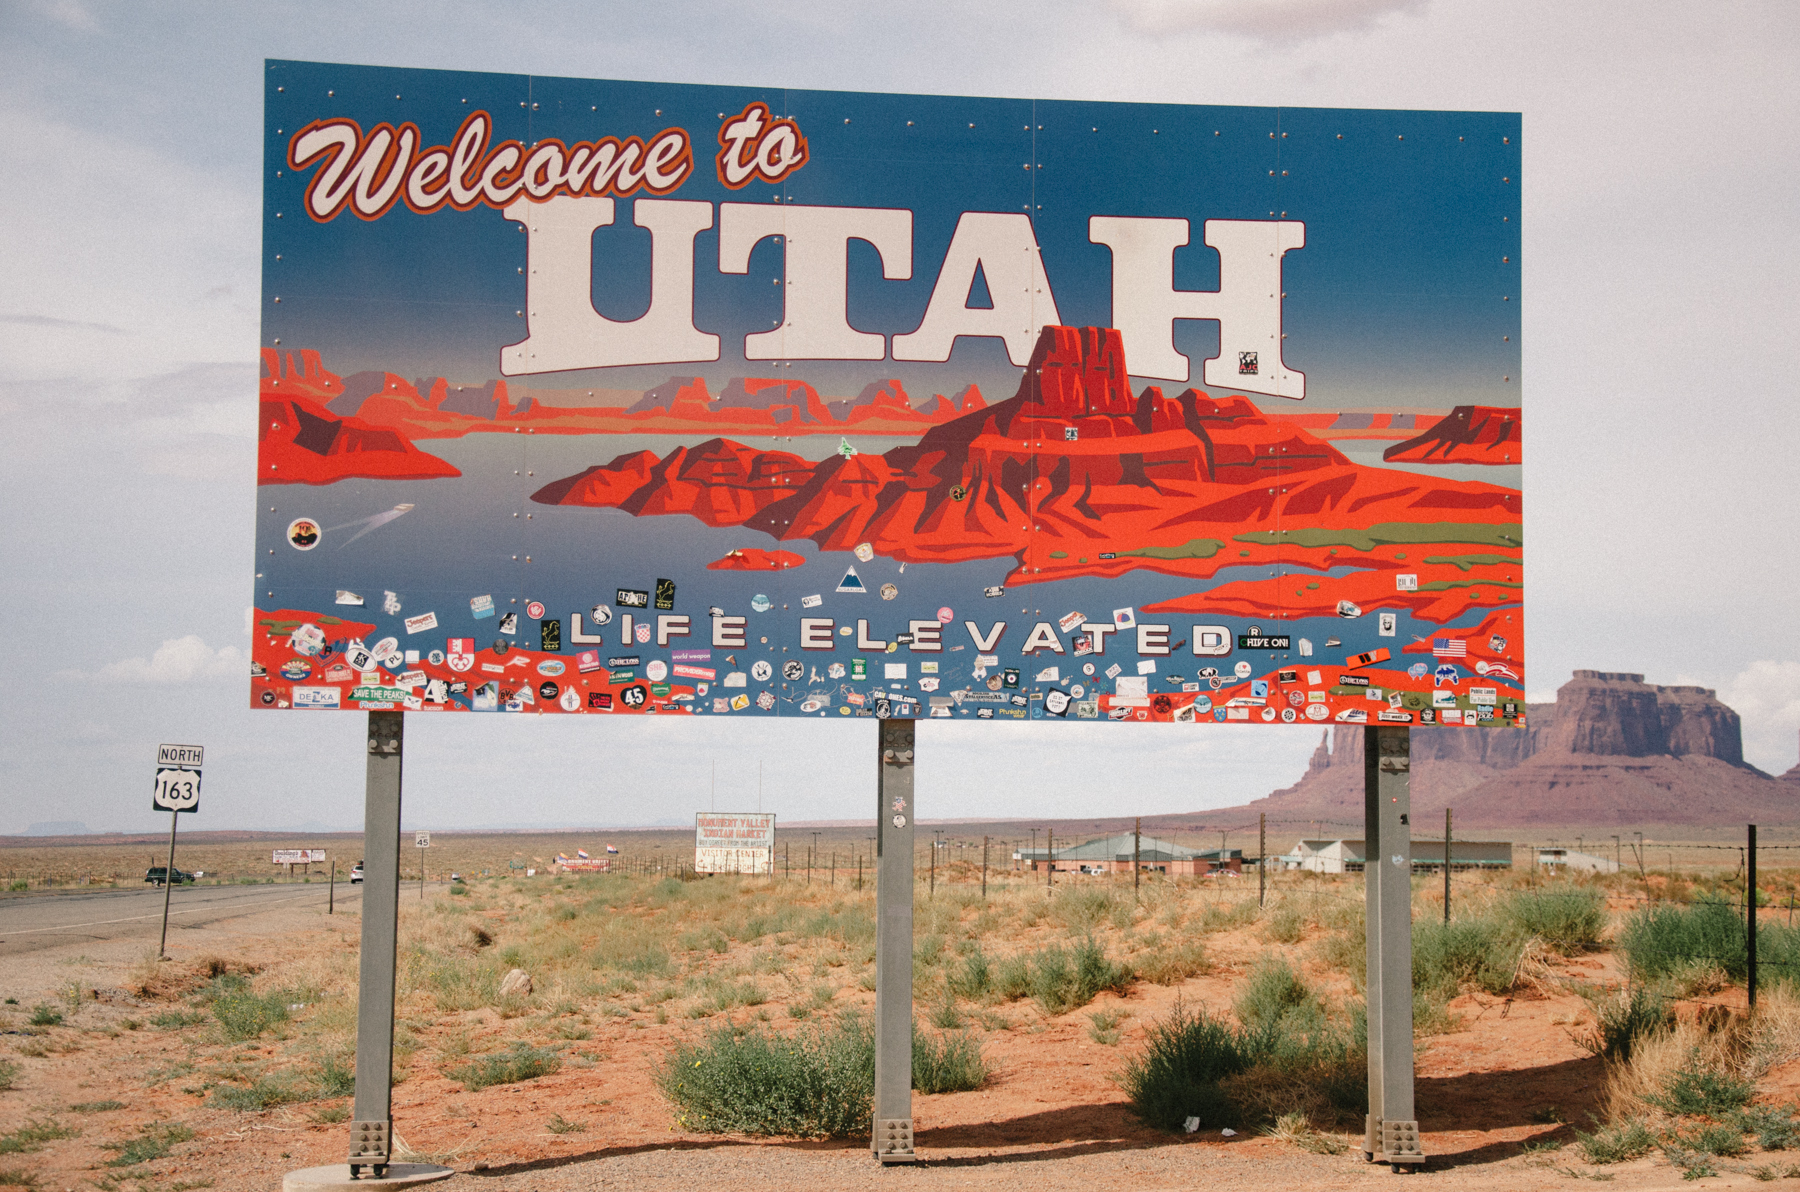 Utah has the best welcome sign of all the states we drove through.